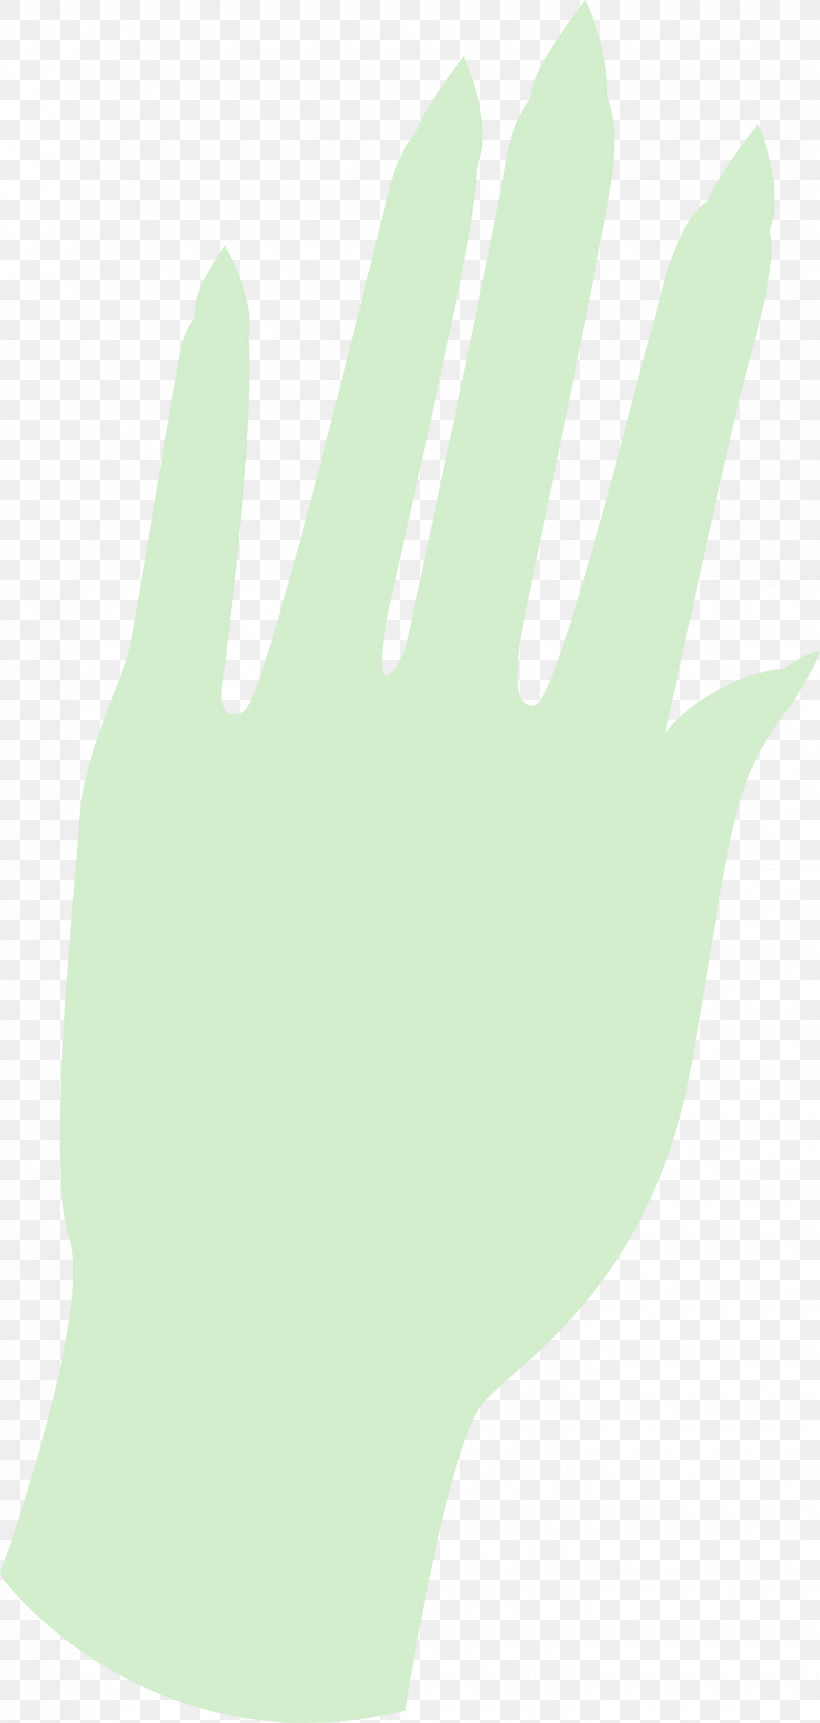 Hand Model Safety Glove Green Line Meter, PNG, 1427x2999px, Watercolor, Glove, Green, Hand, Hand Model Download Free